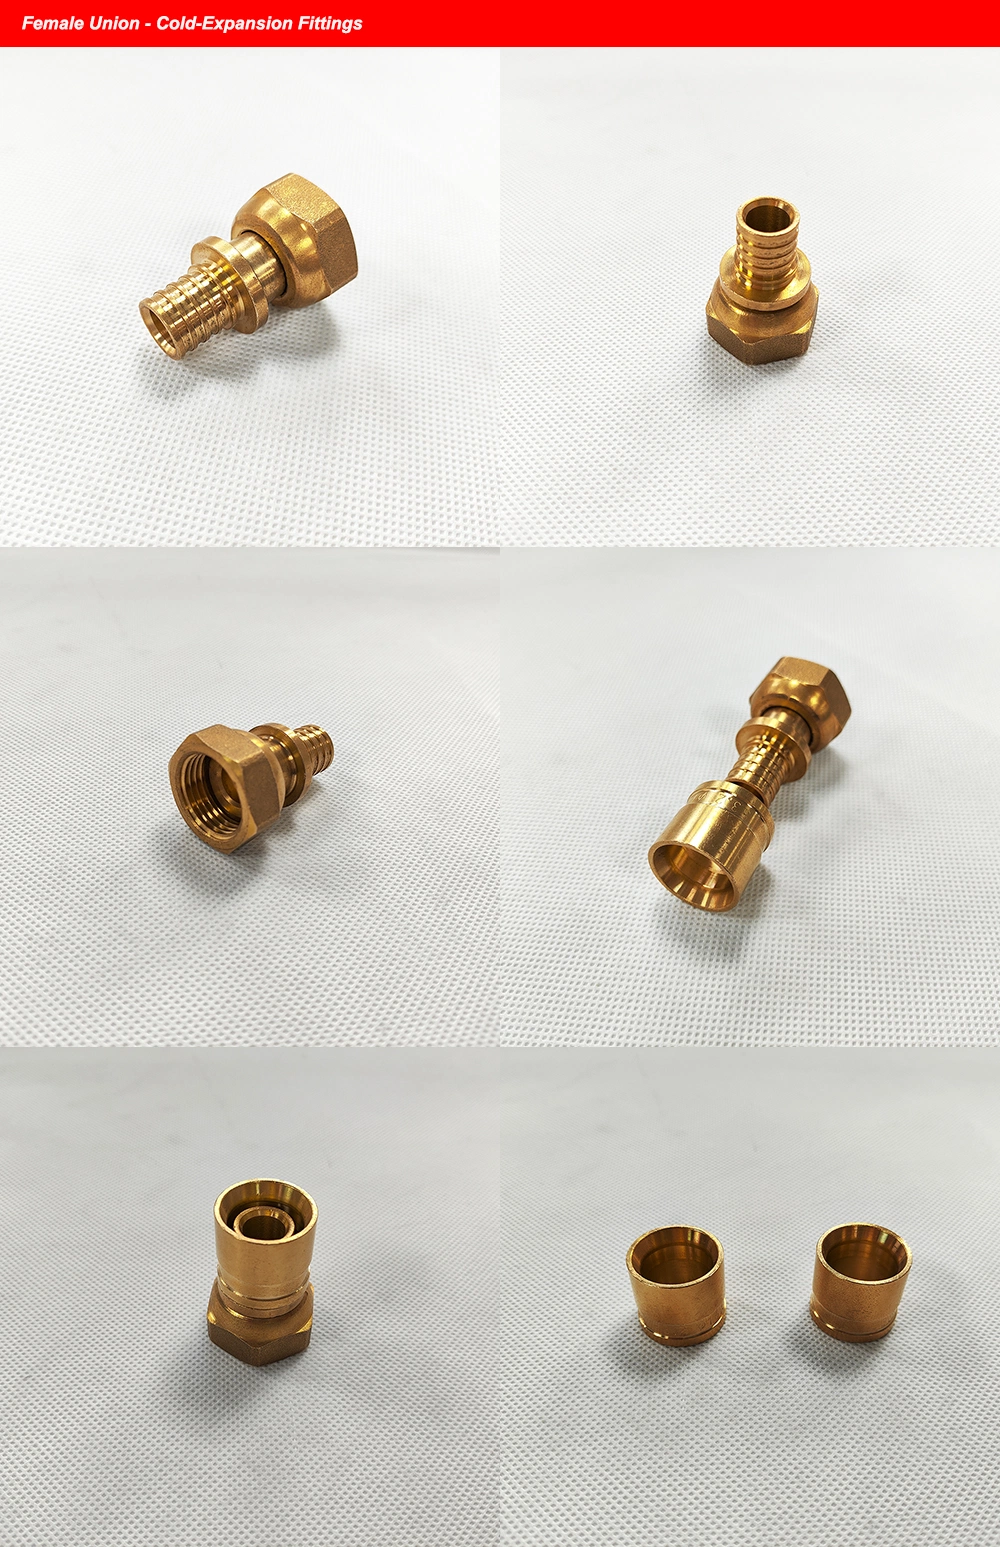 Brass Female Union Pex Sliding Fitting Cold-Expansion Fitting